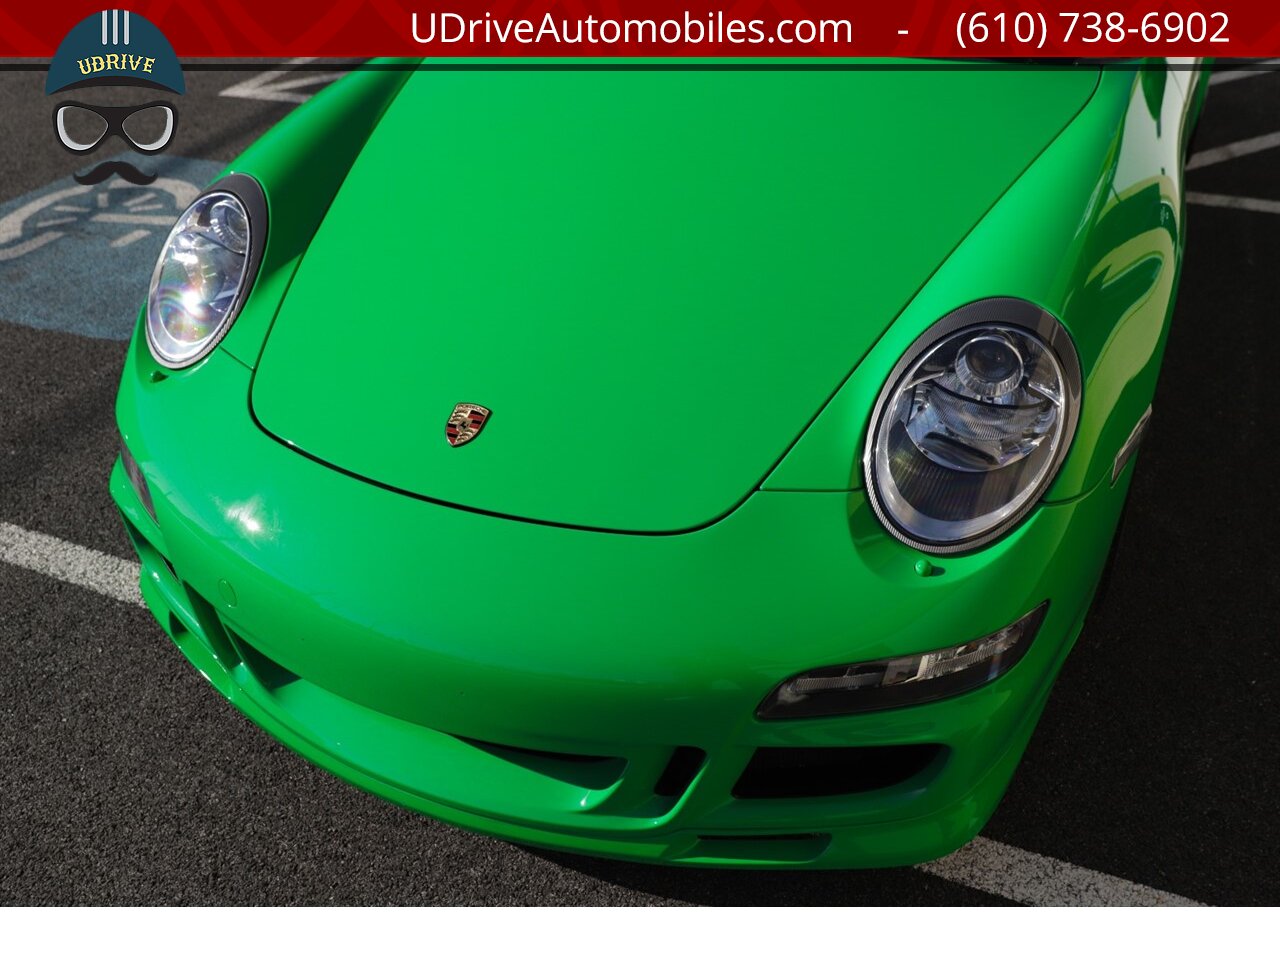 2008 Porsche 911 S 997 6Sp PTS RS Green AeroKit 1of a Kind  $118k MSRP Champion F77 Pkg RG5 Whls - Photo 12 - West Chester, PA 19382